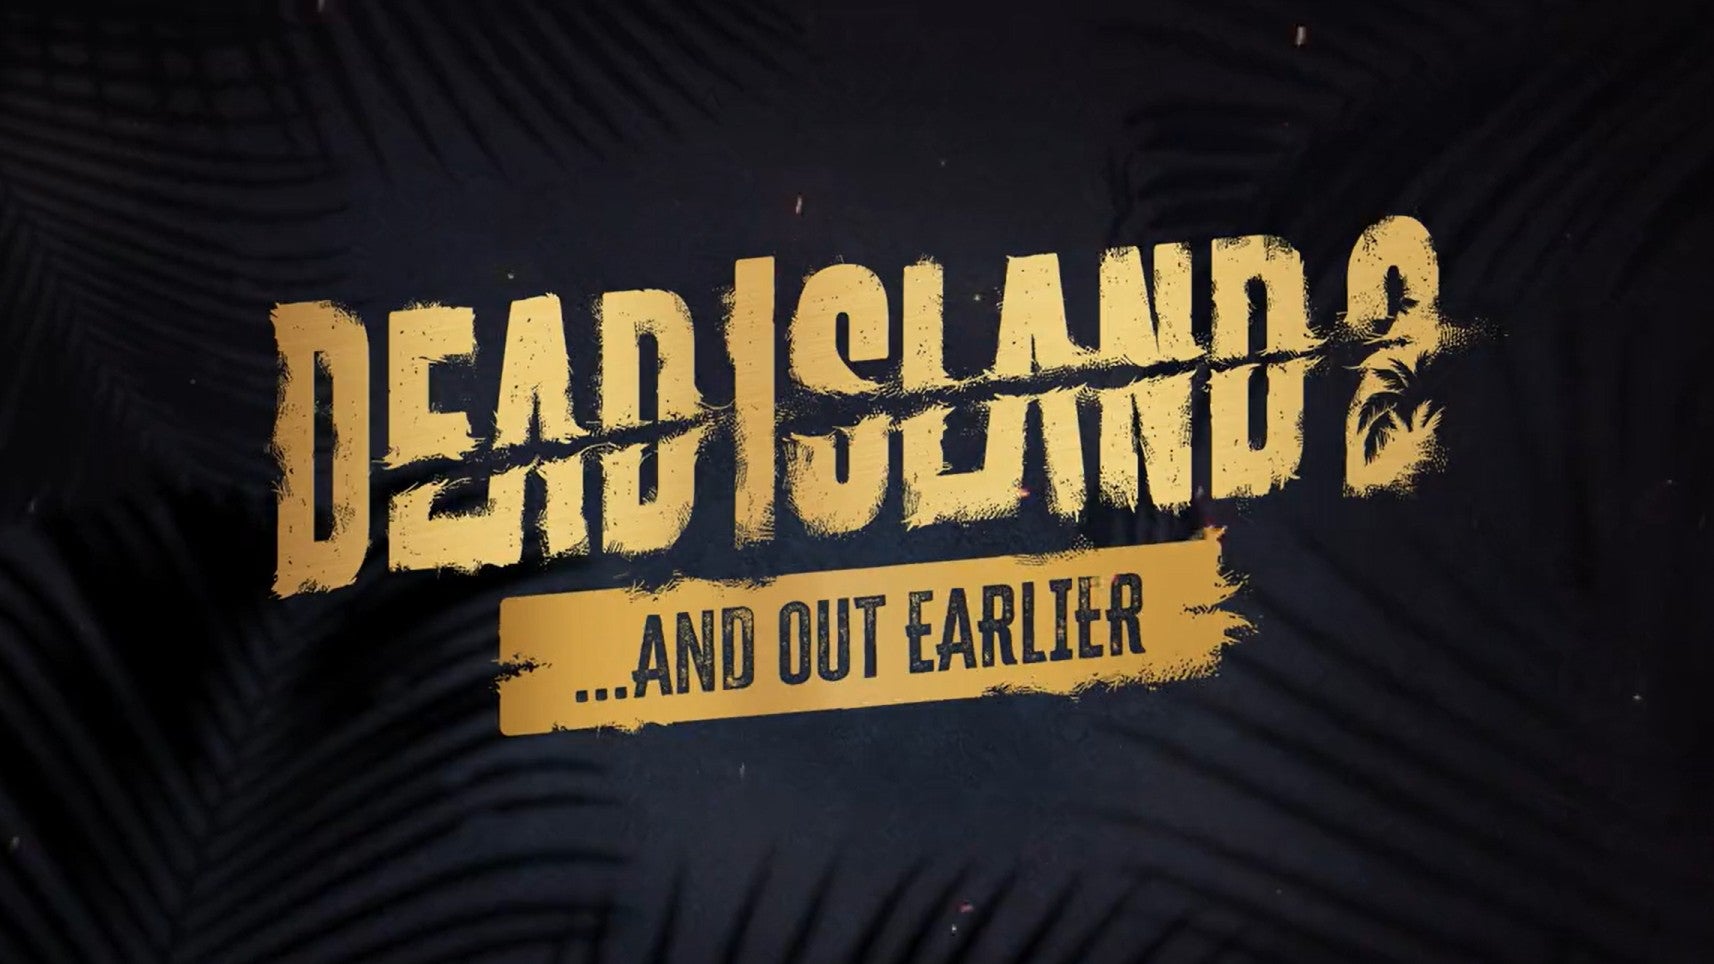 Image for Dead Island 2 release date changes again, now a week earlier